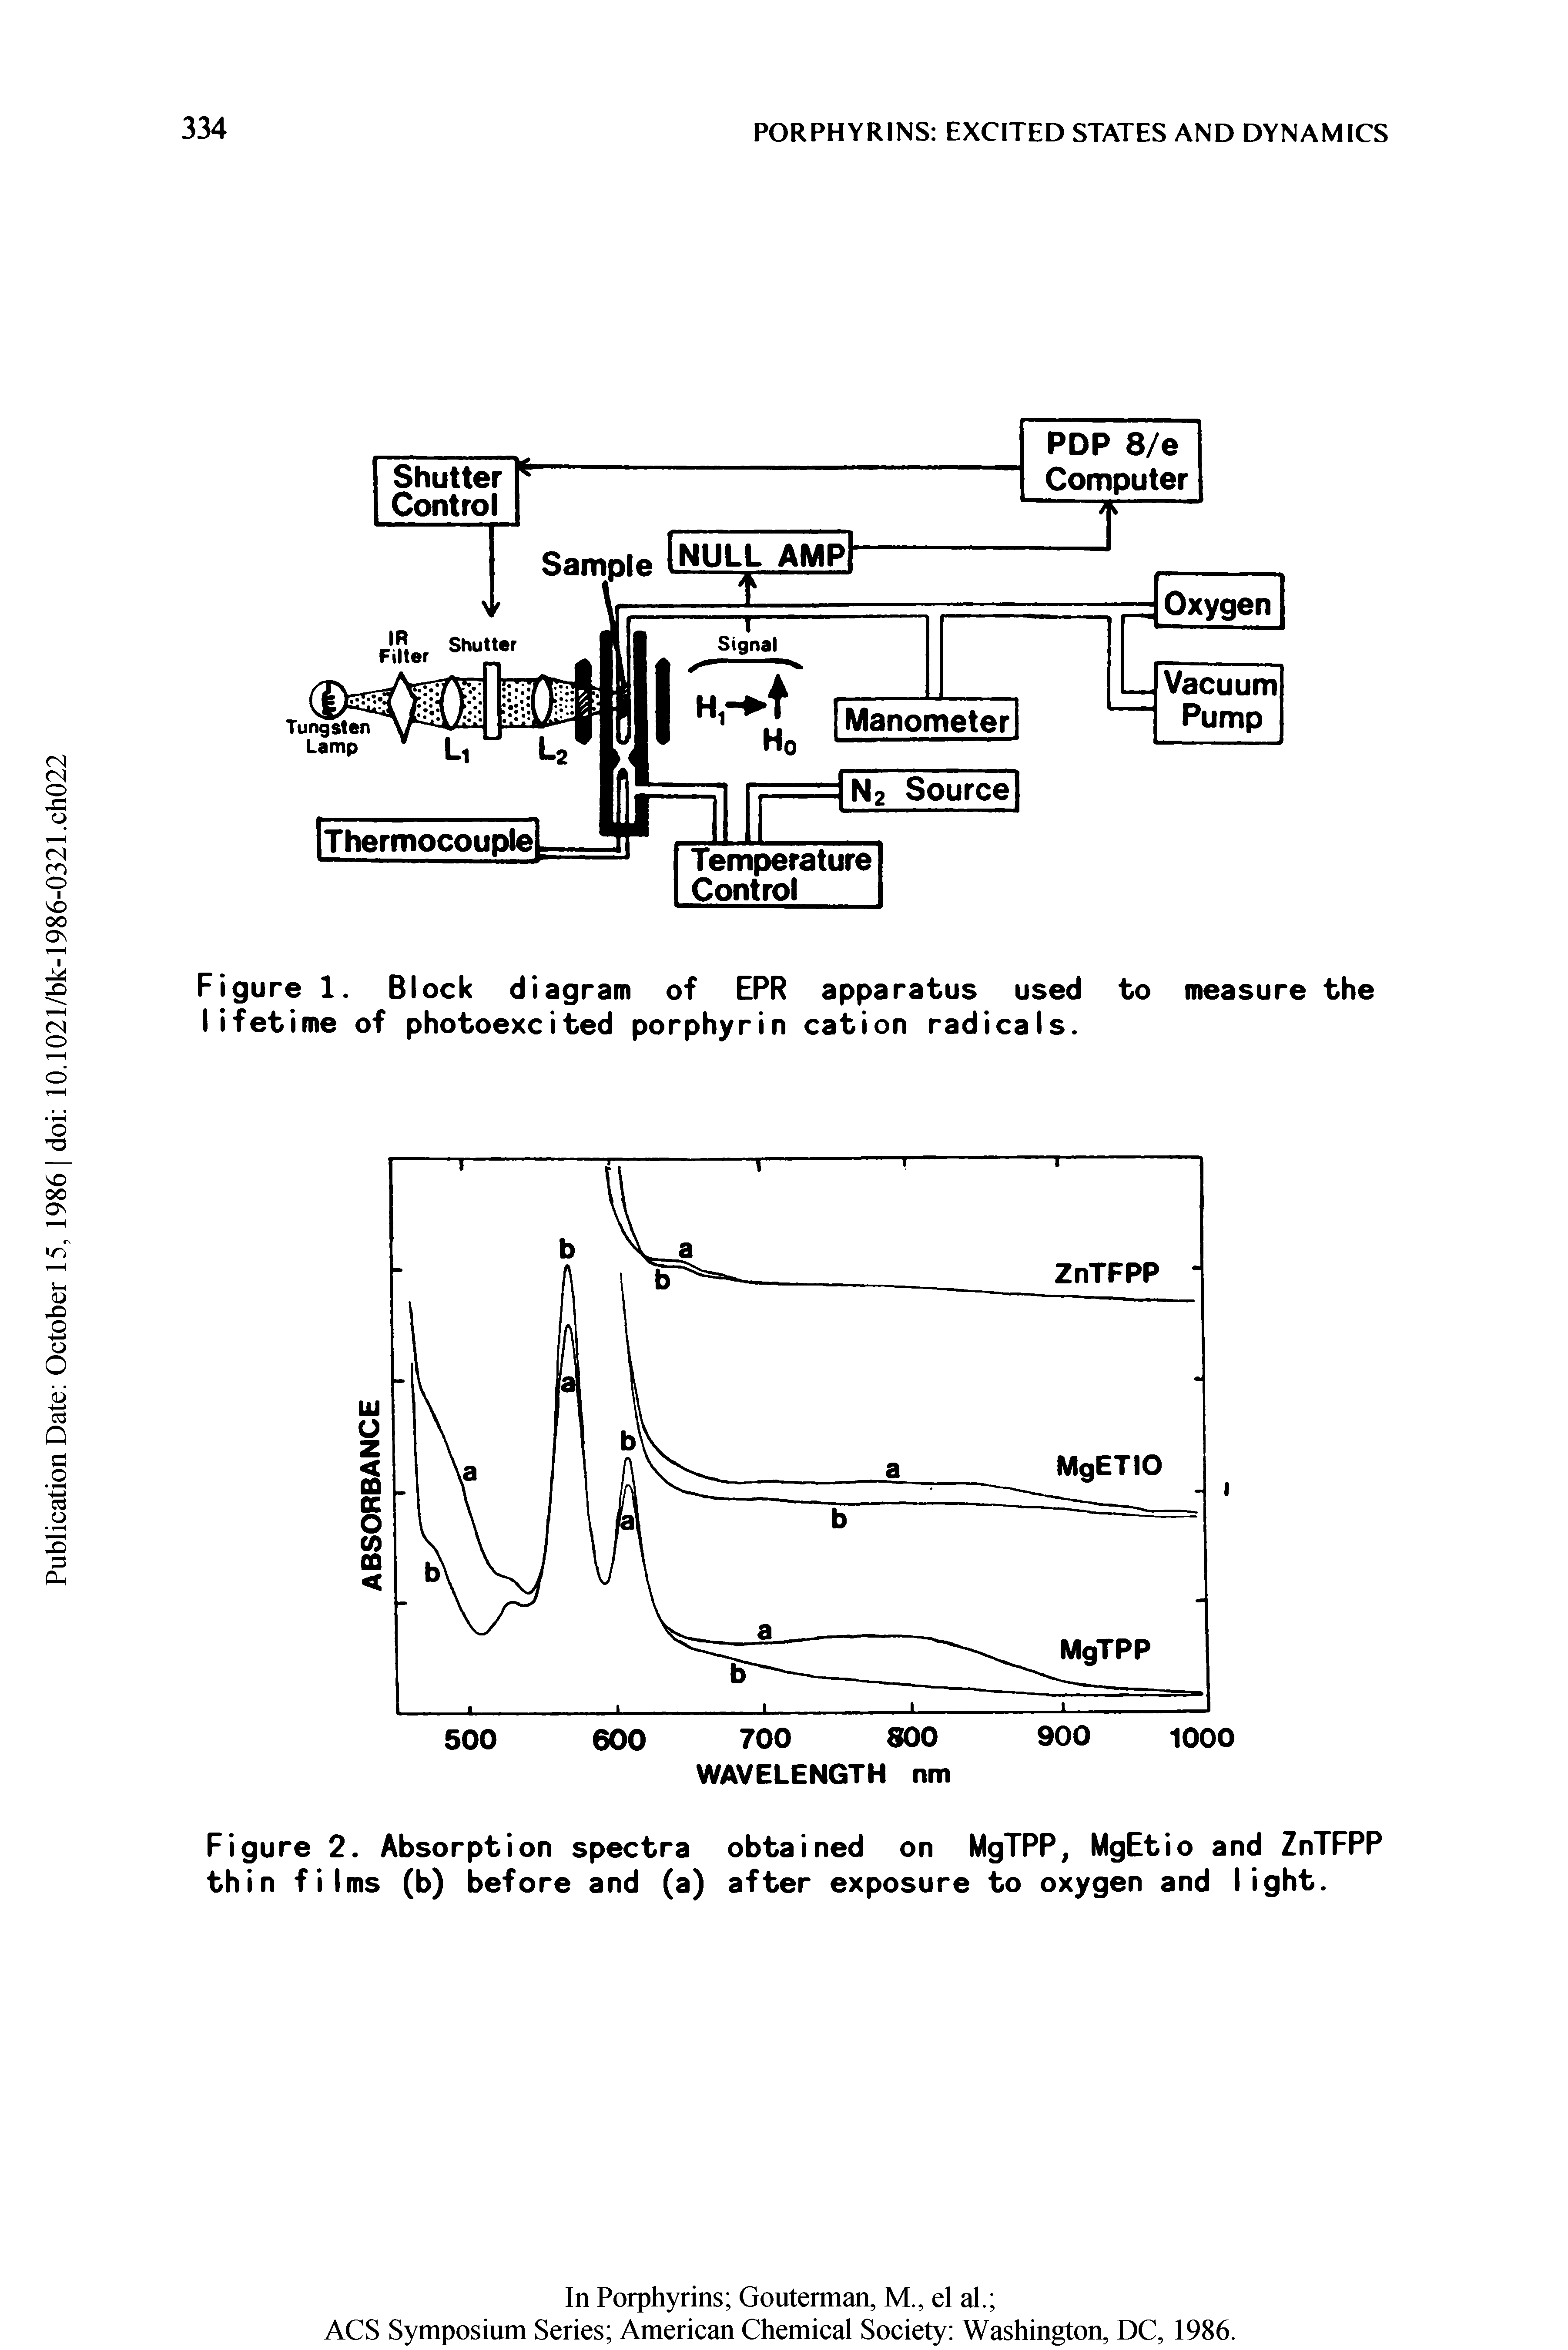 Figure 1. Block diagram of EPR apparatus used to measure the lifetime of photoexcited porphyrin cation radicals.